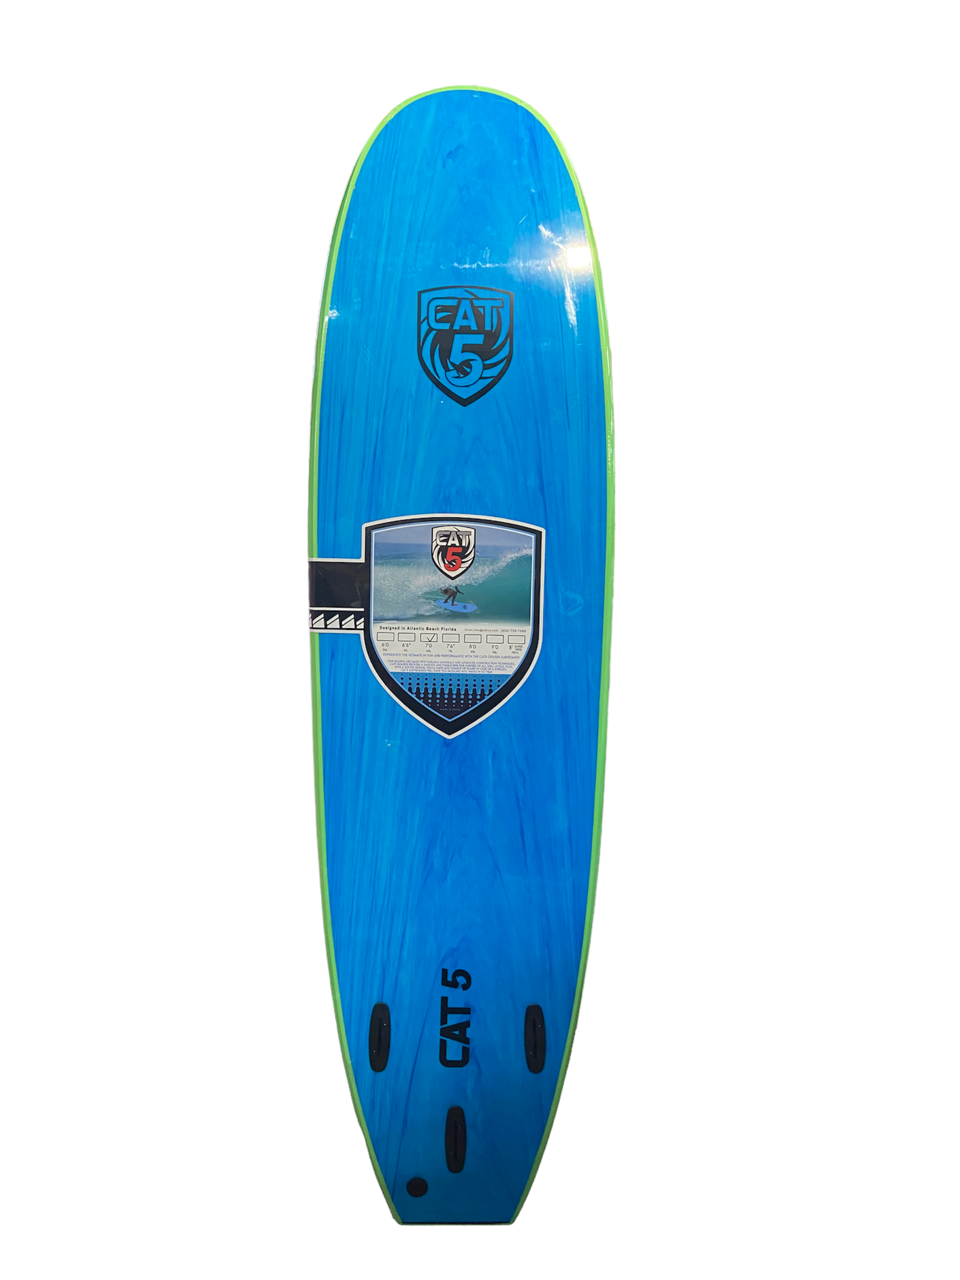 Cat 5 Soft Surfboard 7'6" 22 5/8 with Blue Marble Bottom 78 Liters Softboard